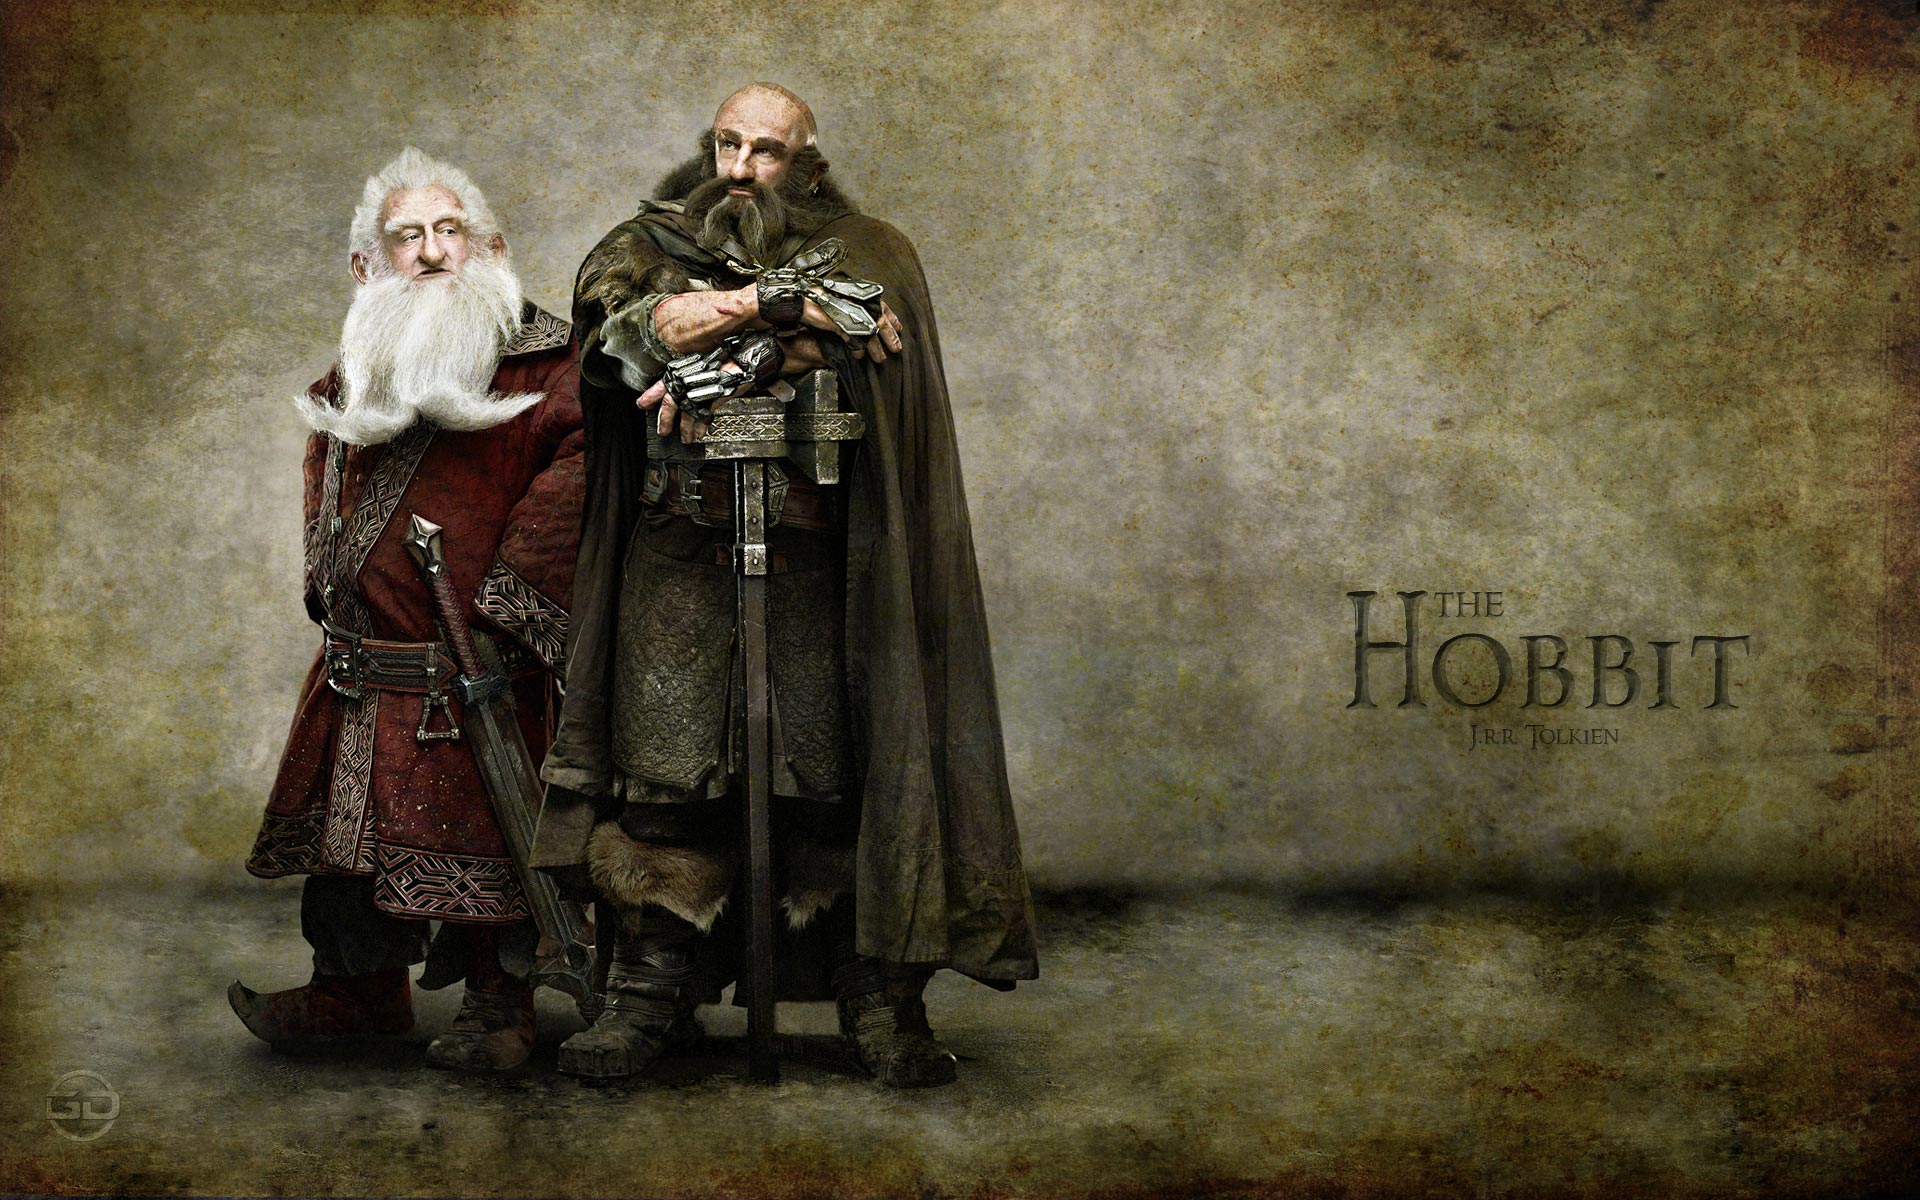 The Hobbit Movie Wallpapers Awesome Wallpapers 1920x1200